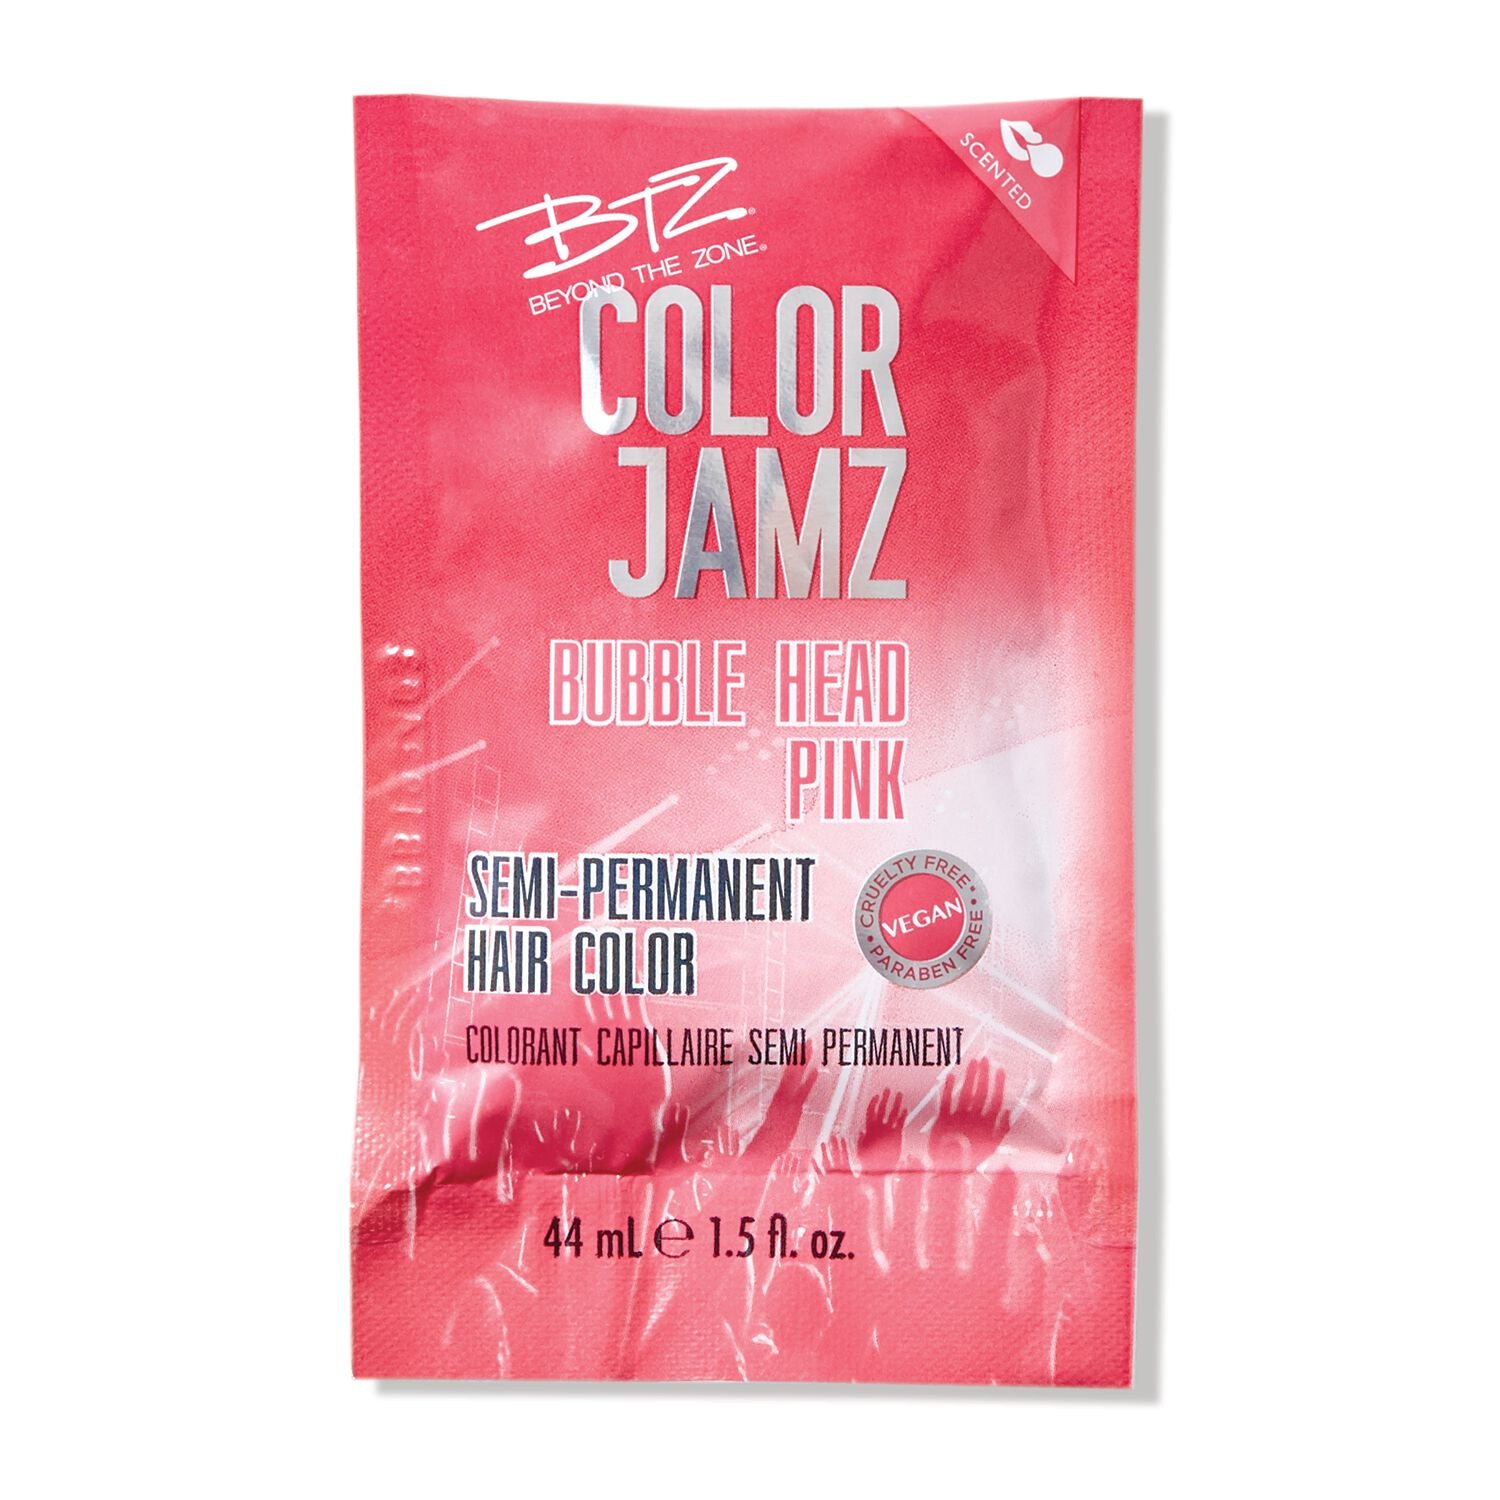 Beyond the Zone Color Jamz Singles Bubble Head Pink